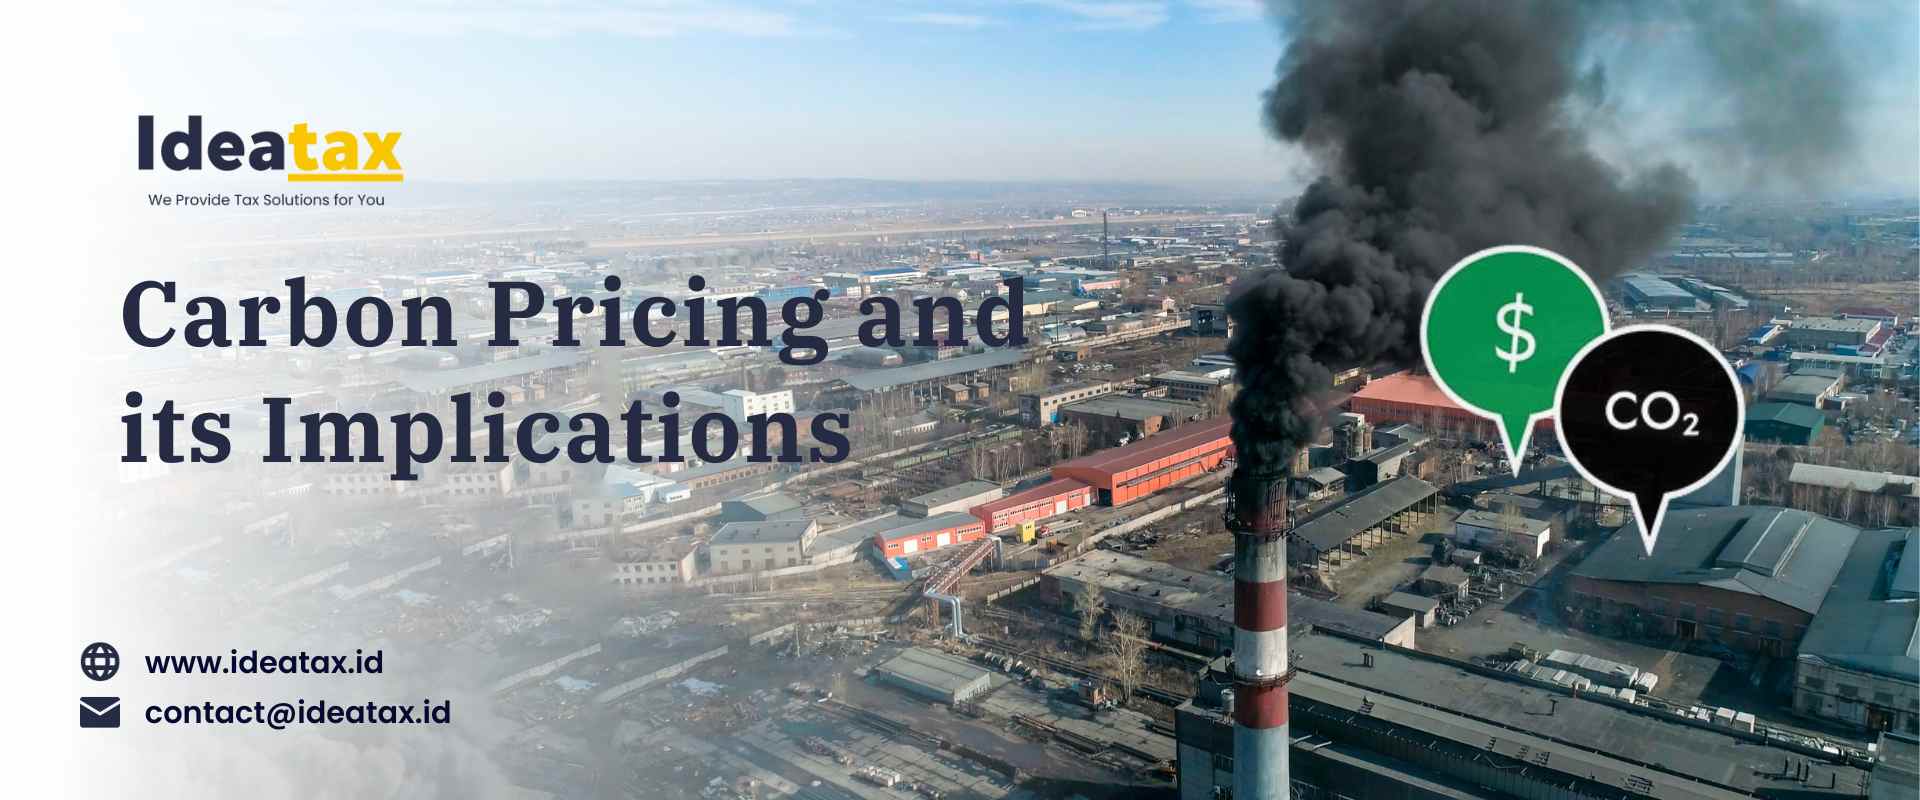 Carbon Pricing and its Implications